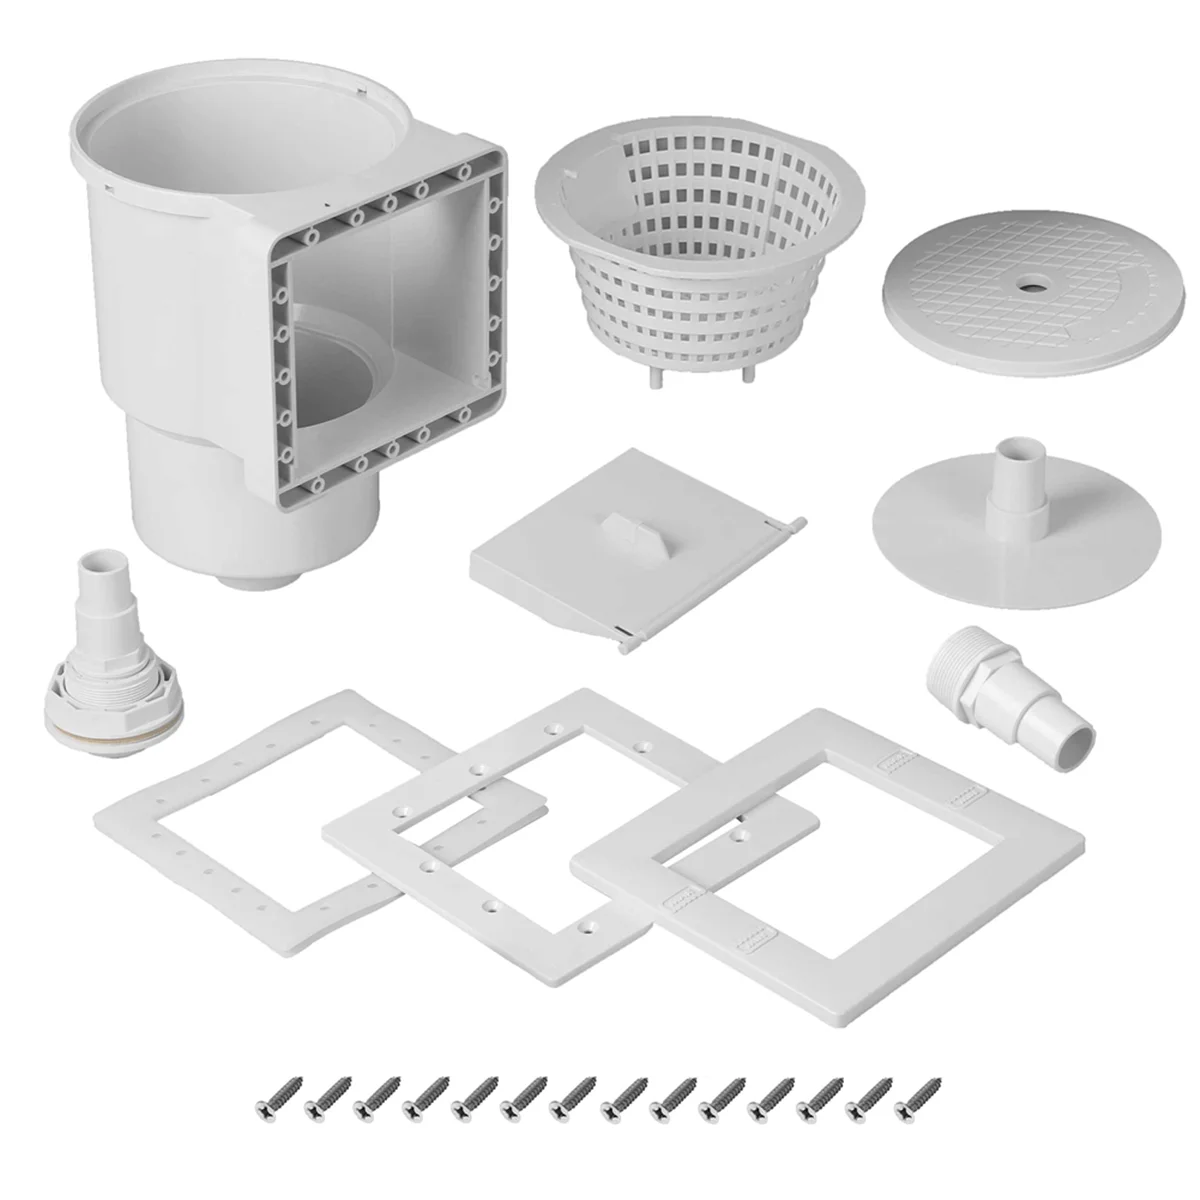 

Universal Fit Above Ground Pool Skimmer-Pool Skimmer Parts Kit-Opening Width 6Inch Fits All Standard Pool Wall Cutouts